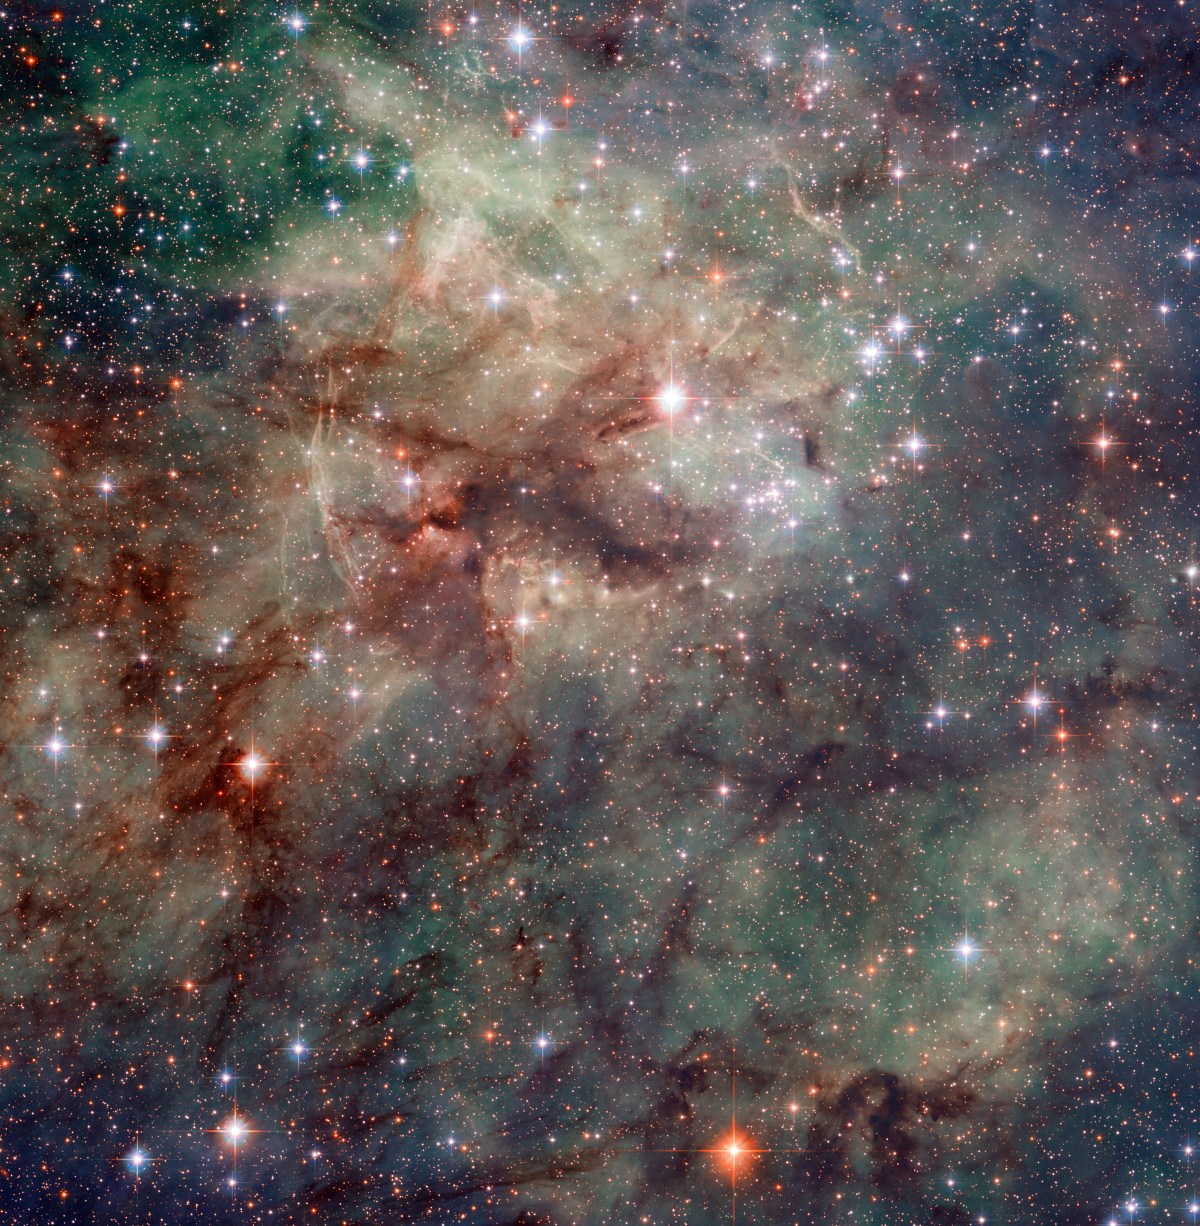 Hubble has taken this stunning close-up shot of part of the Tarantula Nebula. This star-forming region of ionised hydrogen gas is in the Large Magellanic Cloud, a small galaxy which neighbours the Milky Way. It is home to many extreme conditions including supernova remnants and the heaviest star ever found. The Tarantula Nebula is the most luminous nebula of its type  in the local Universe.